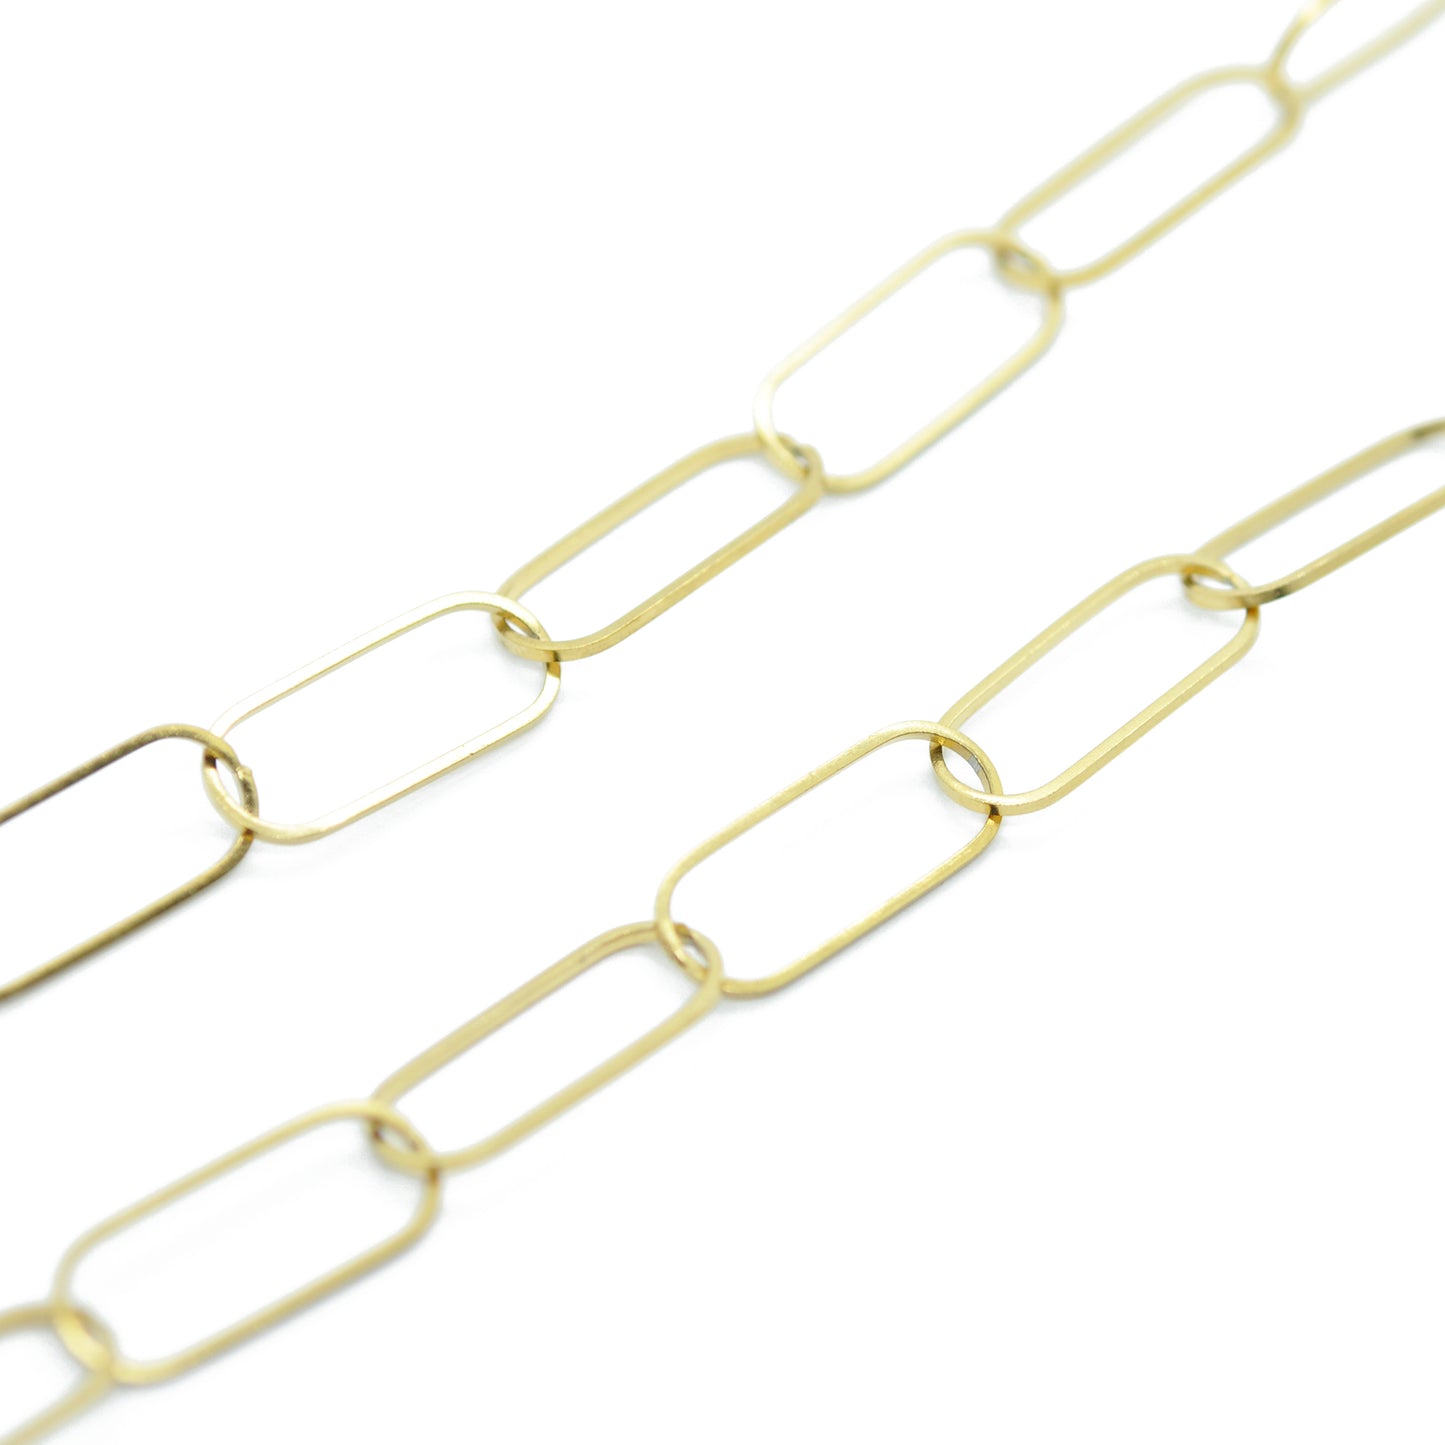 Paper clip stainless steel chain / gold plated / 20 x 7 mm